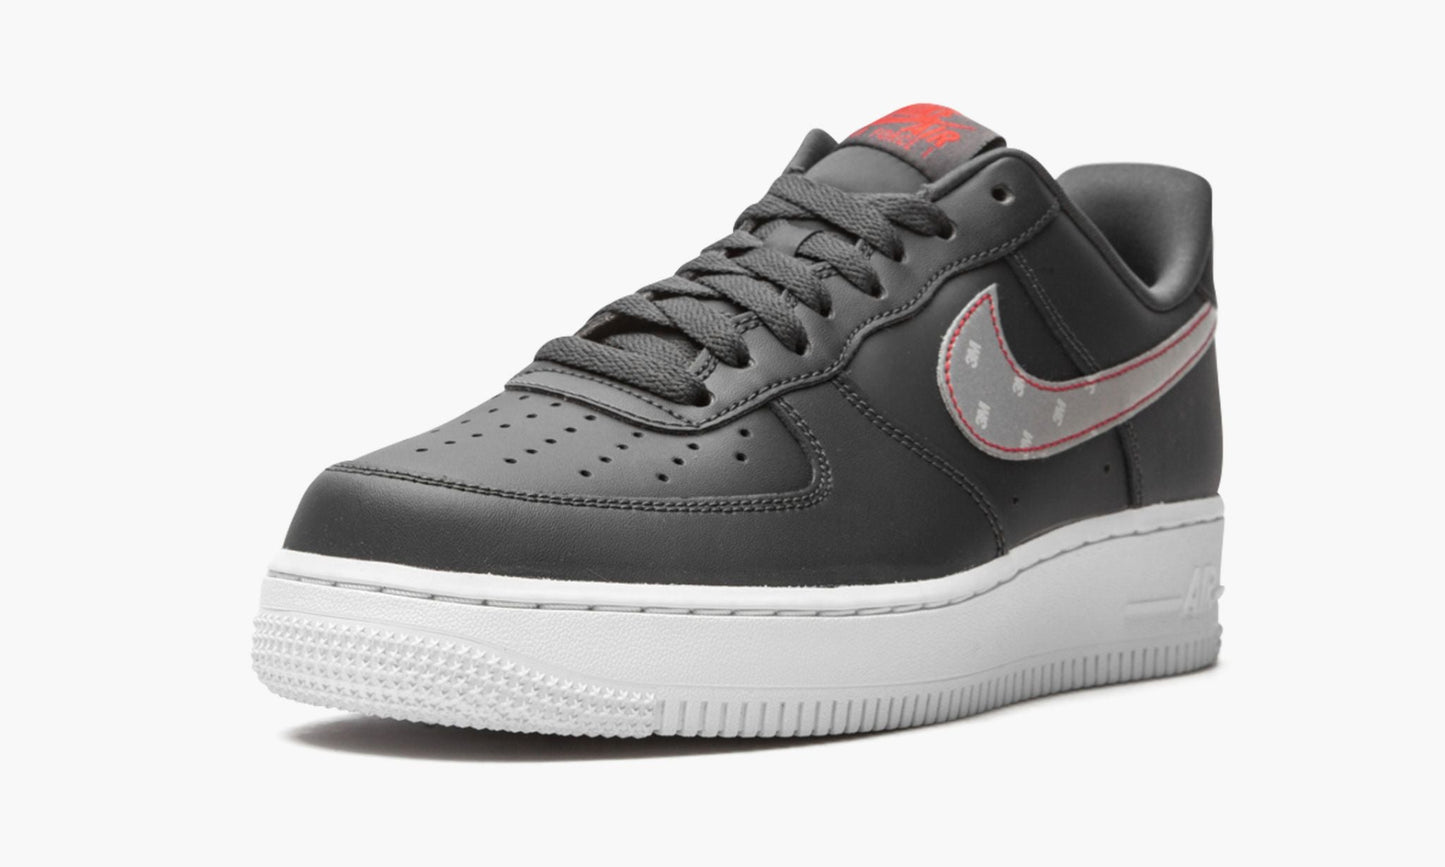 Air Force 1 '07 3M "Anthracite"